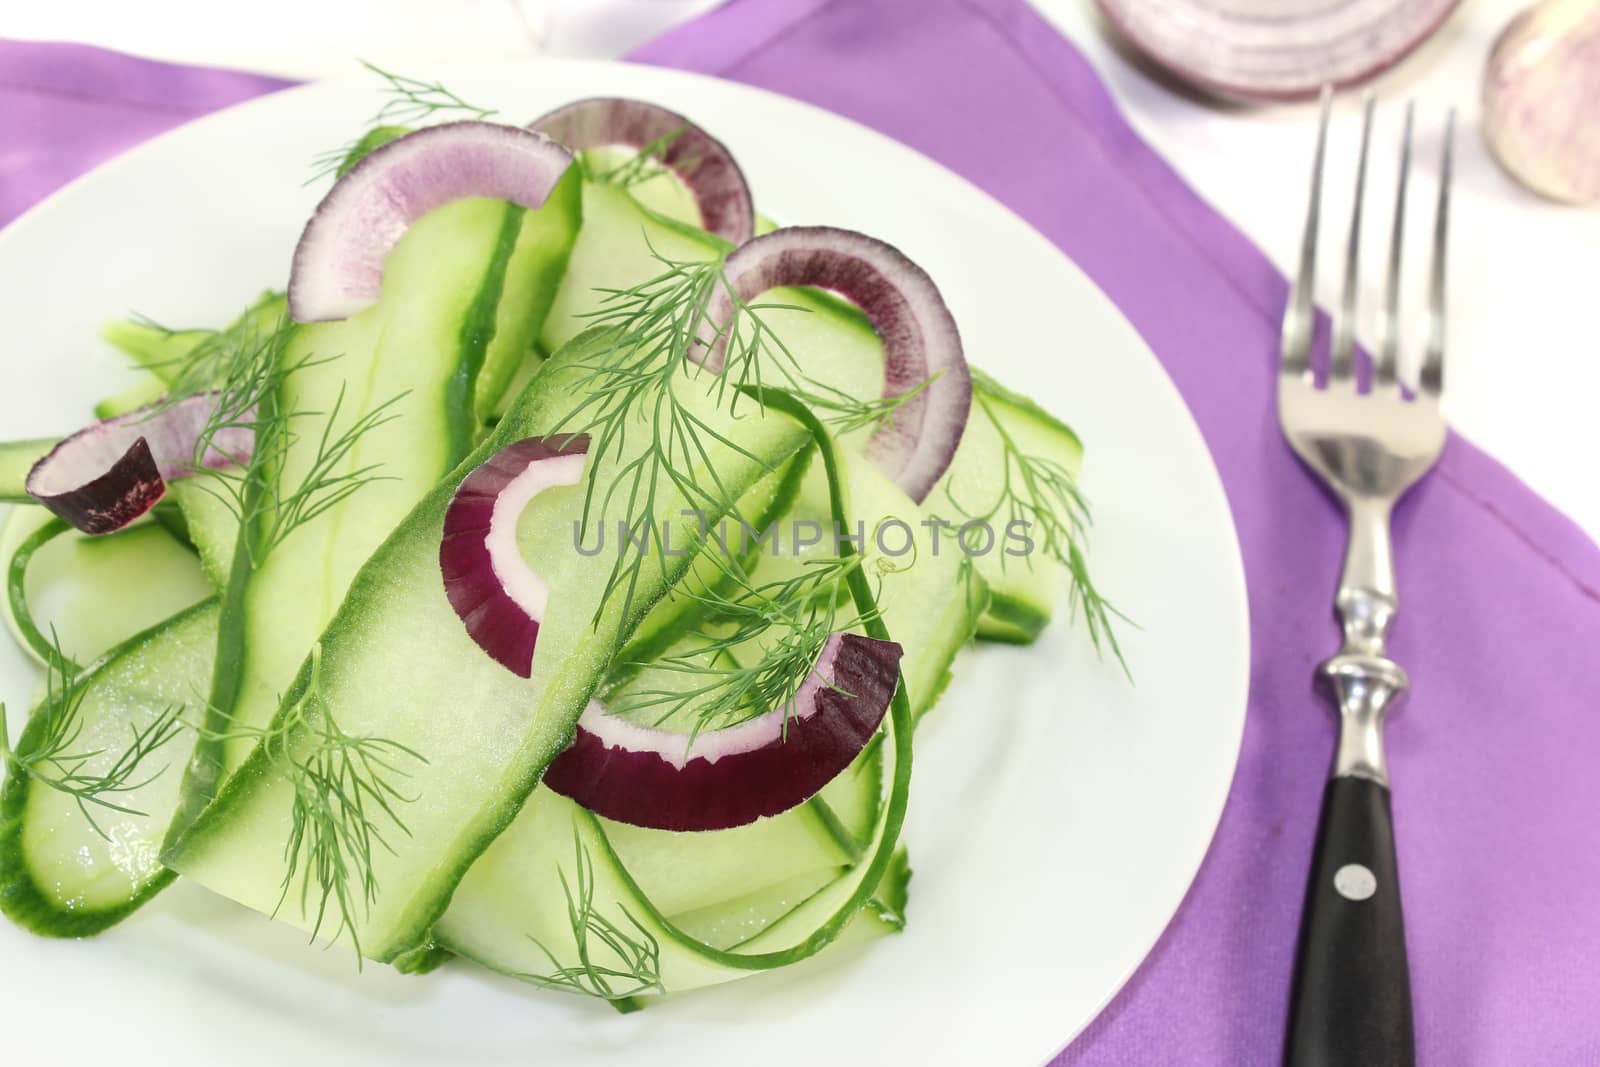 Cucumber salad with red onions and dill on light background